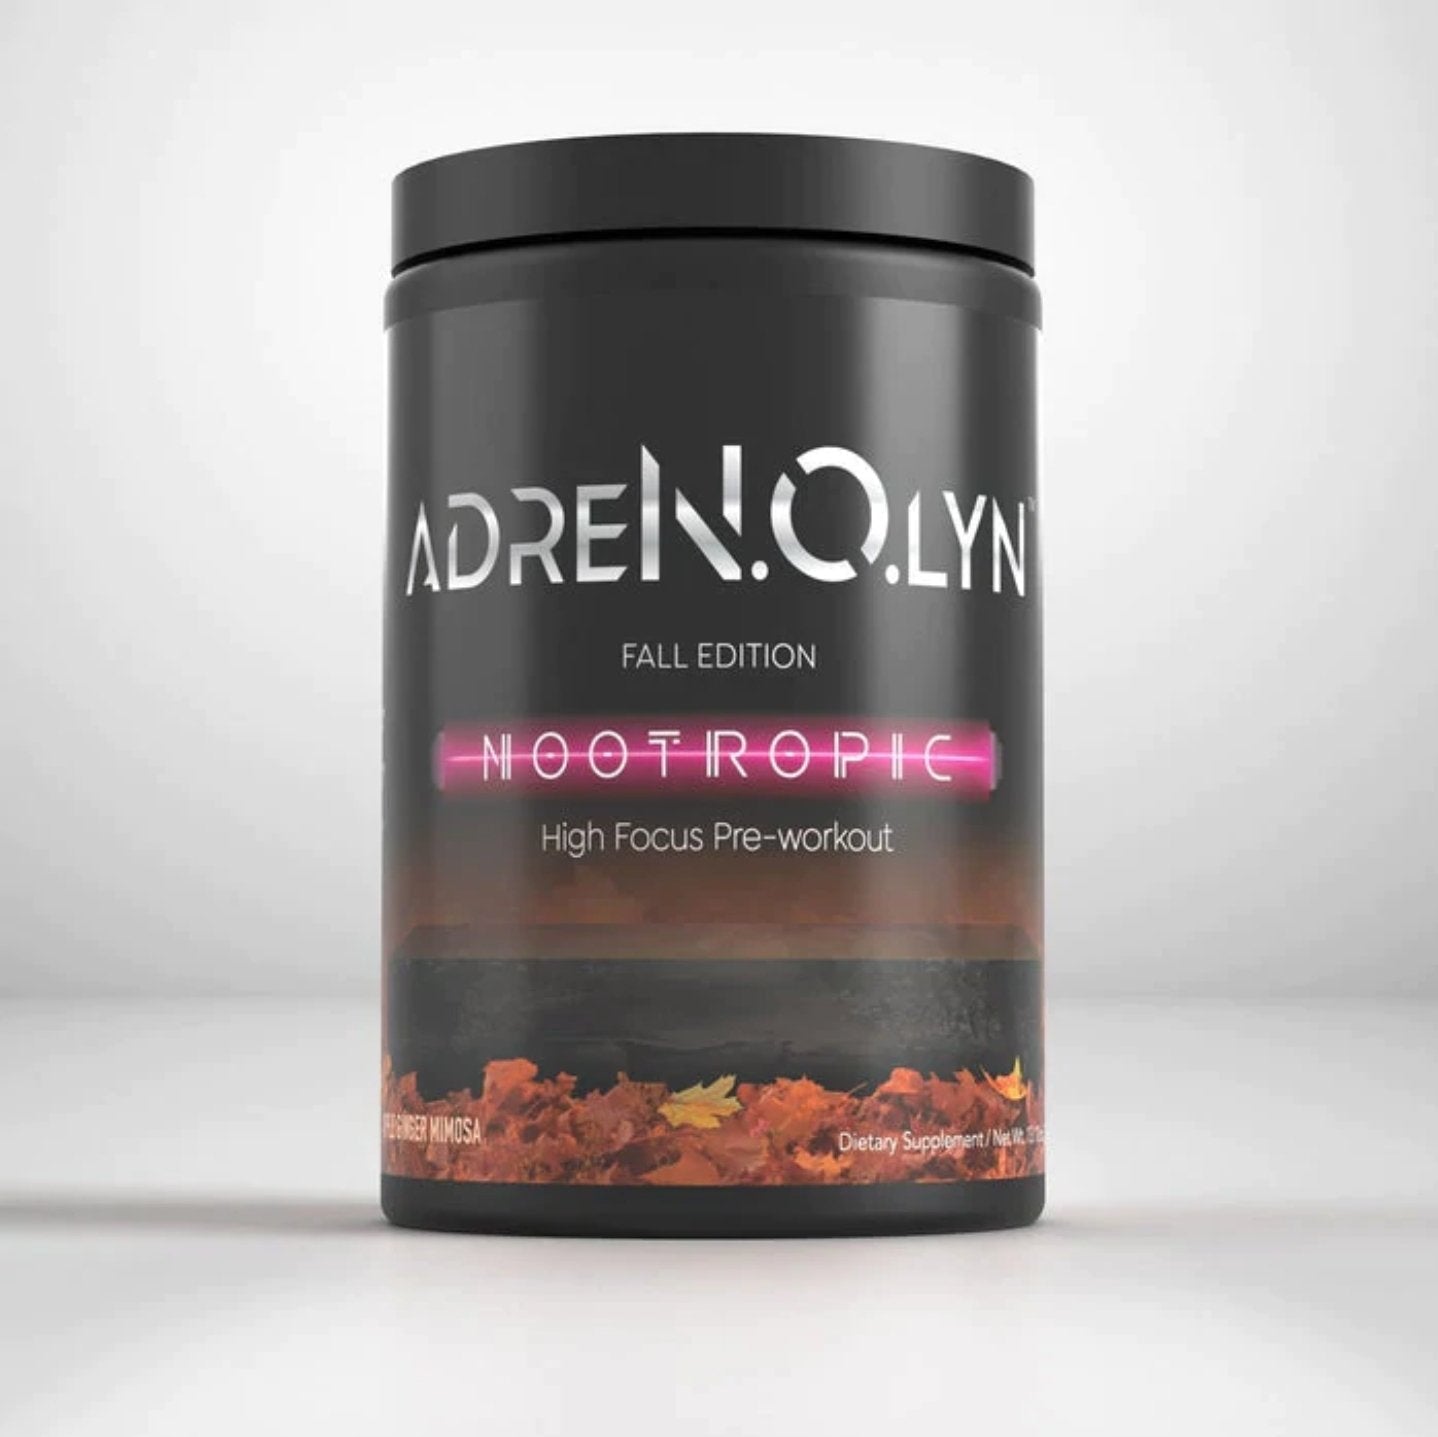 BlackMarketLabs- Adrenolyn-Nootropic- High Focus PreWorkout 25 Servings - Krazy Muscle Nutrition Not specifiedSQ6574782